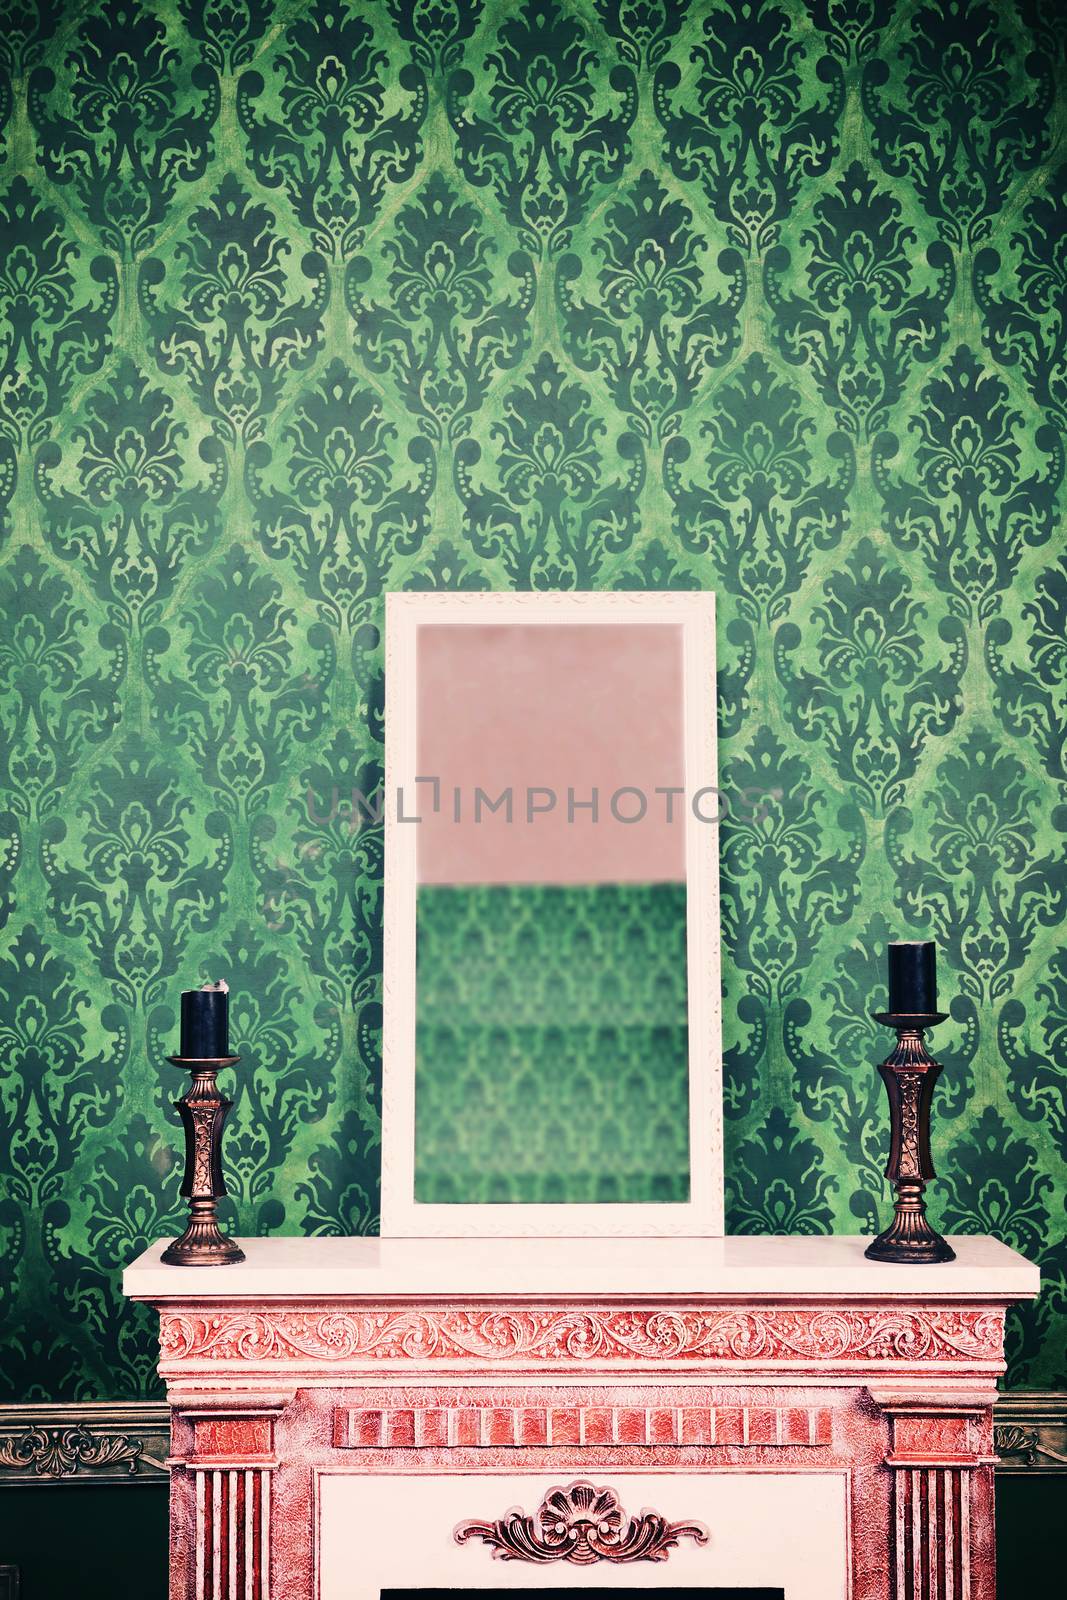 Mirror on chimney in room with vintage retro pattern wall by DCStudio